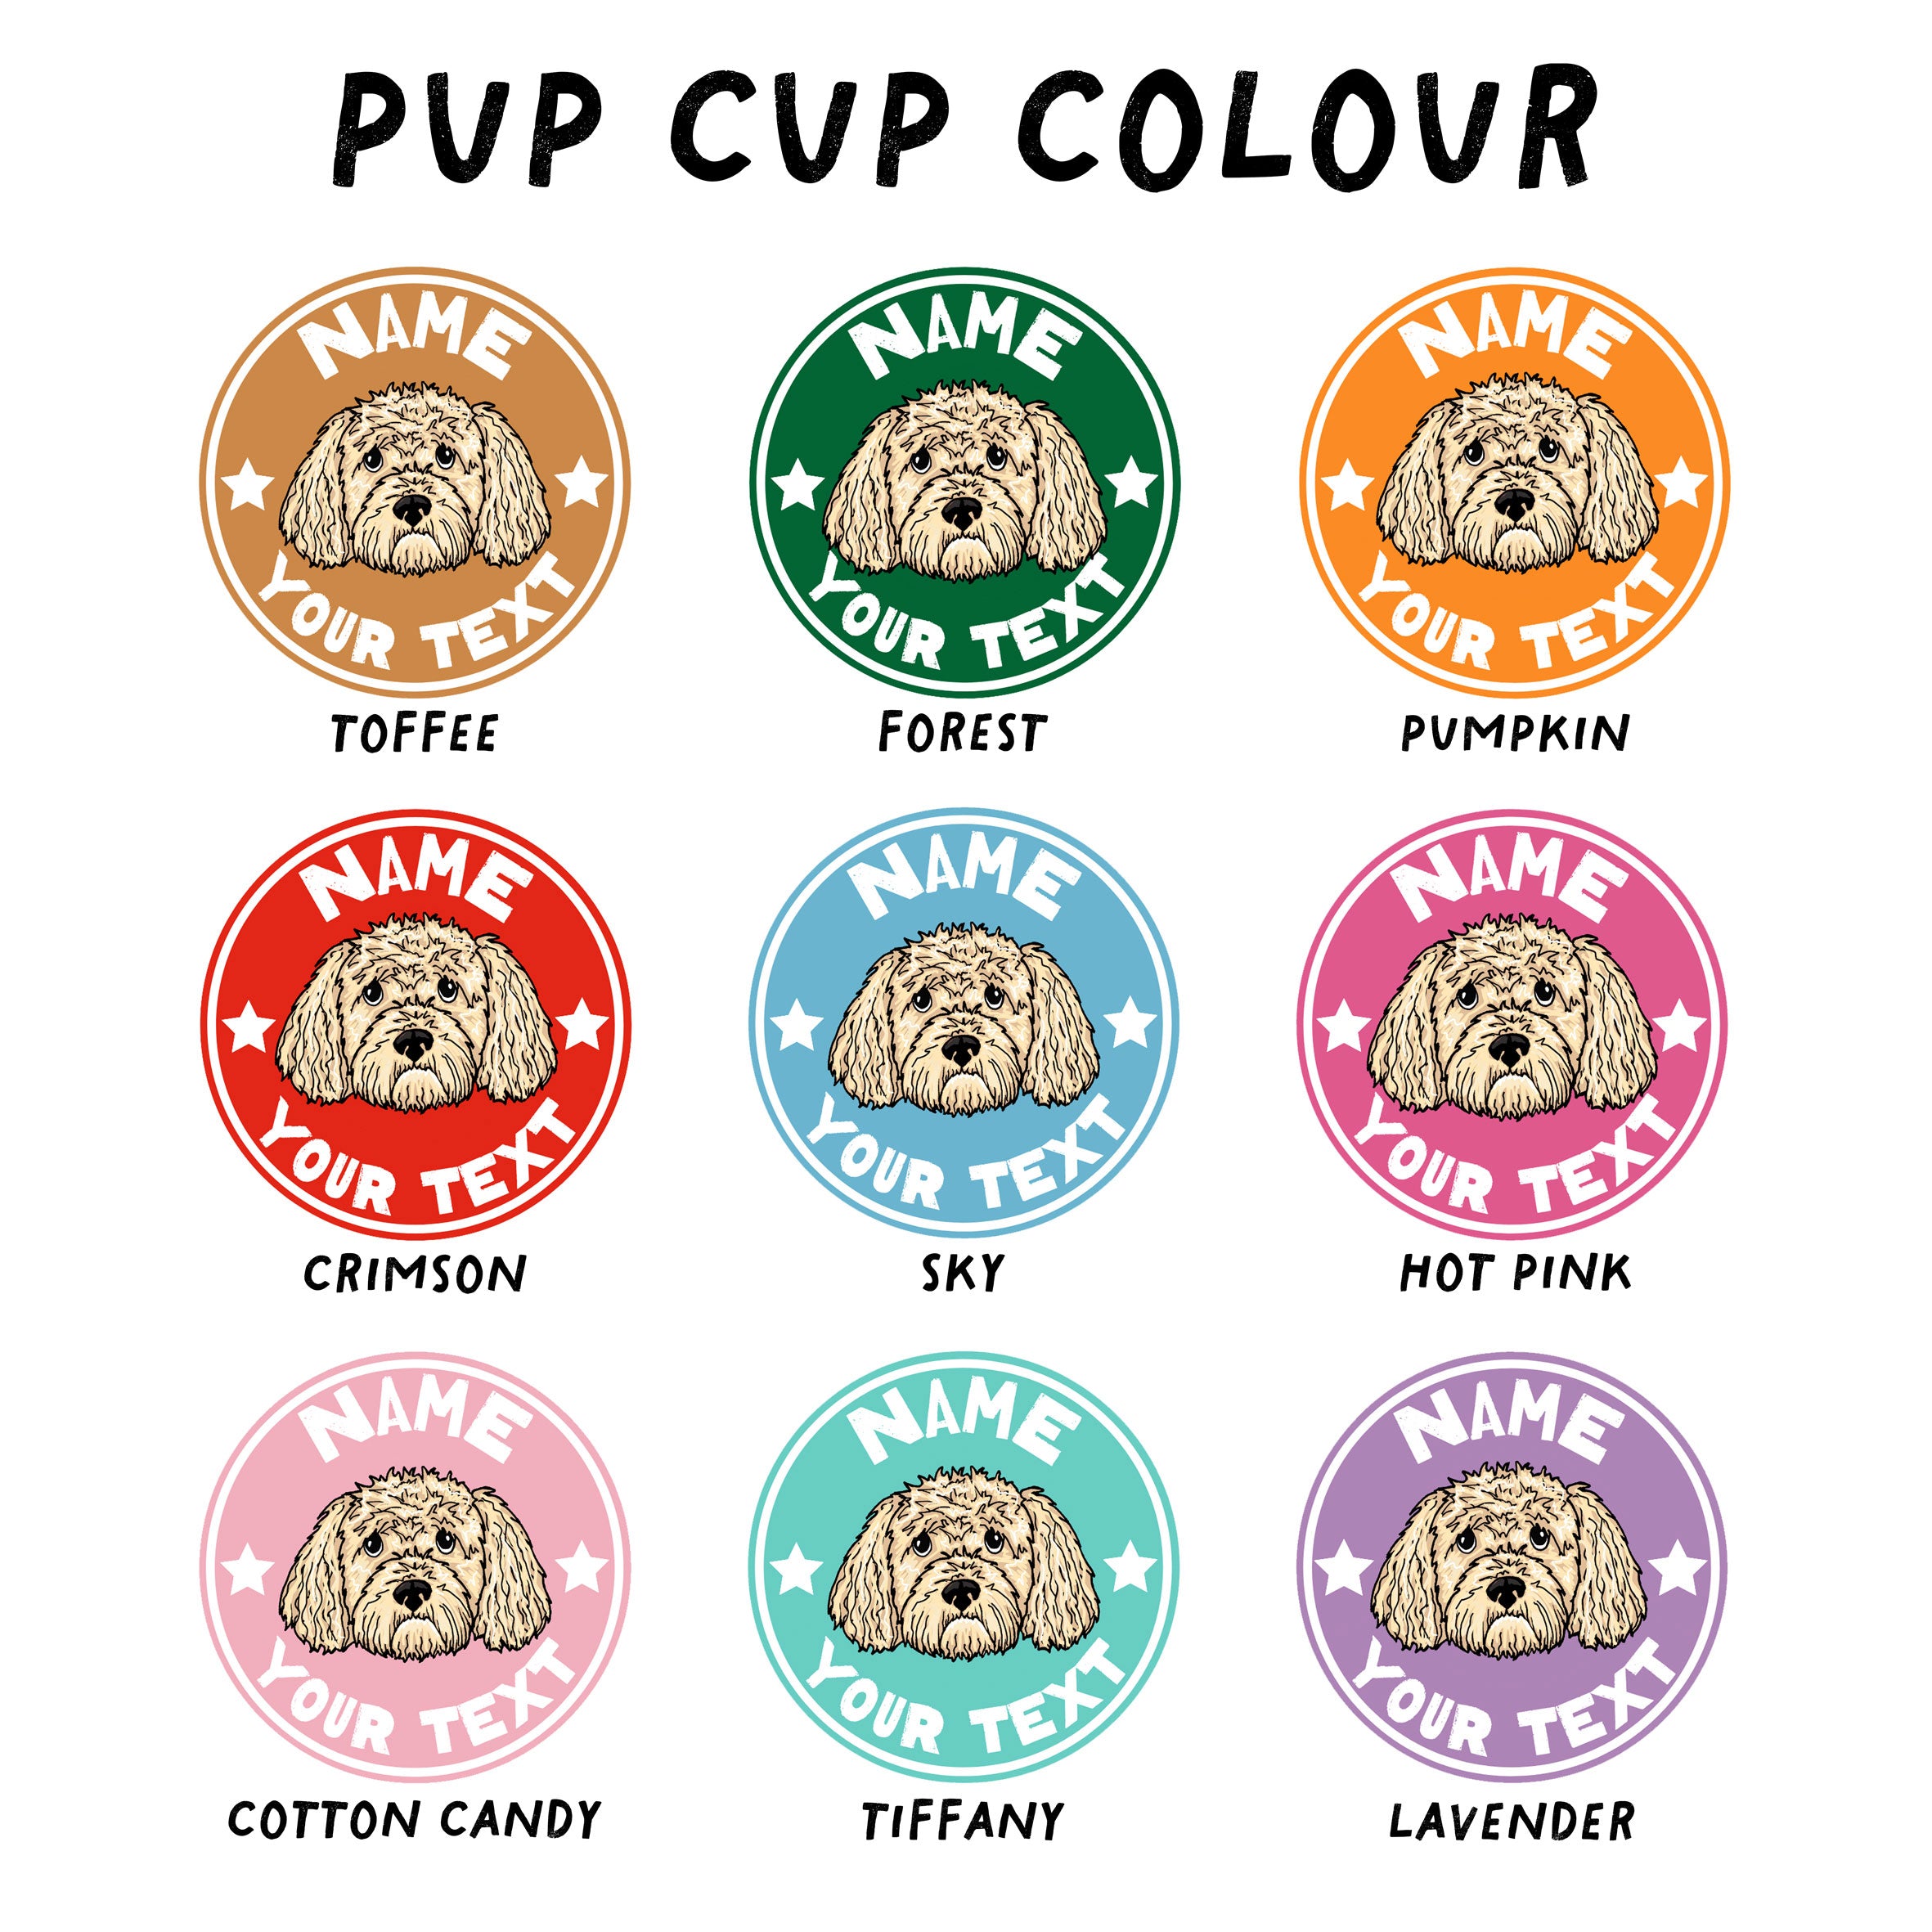 The Dog and Hooman Pup Cup Set